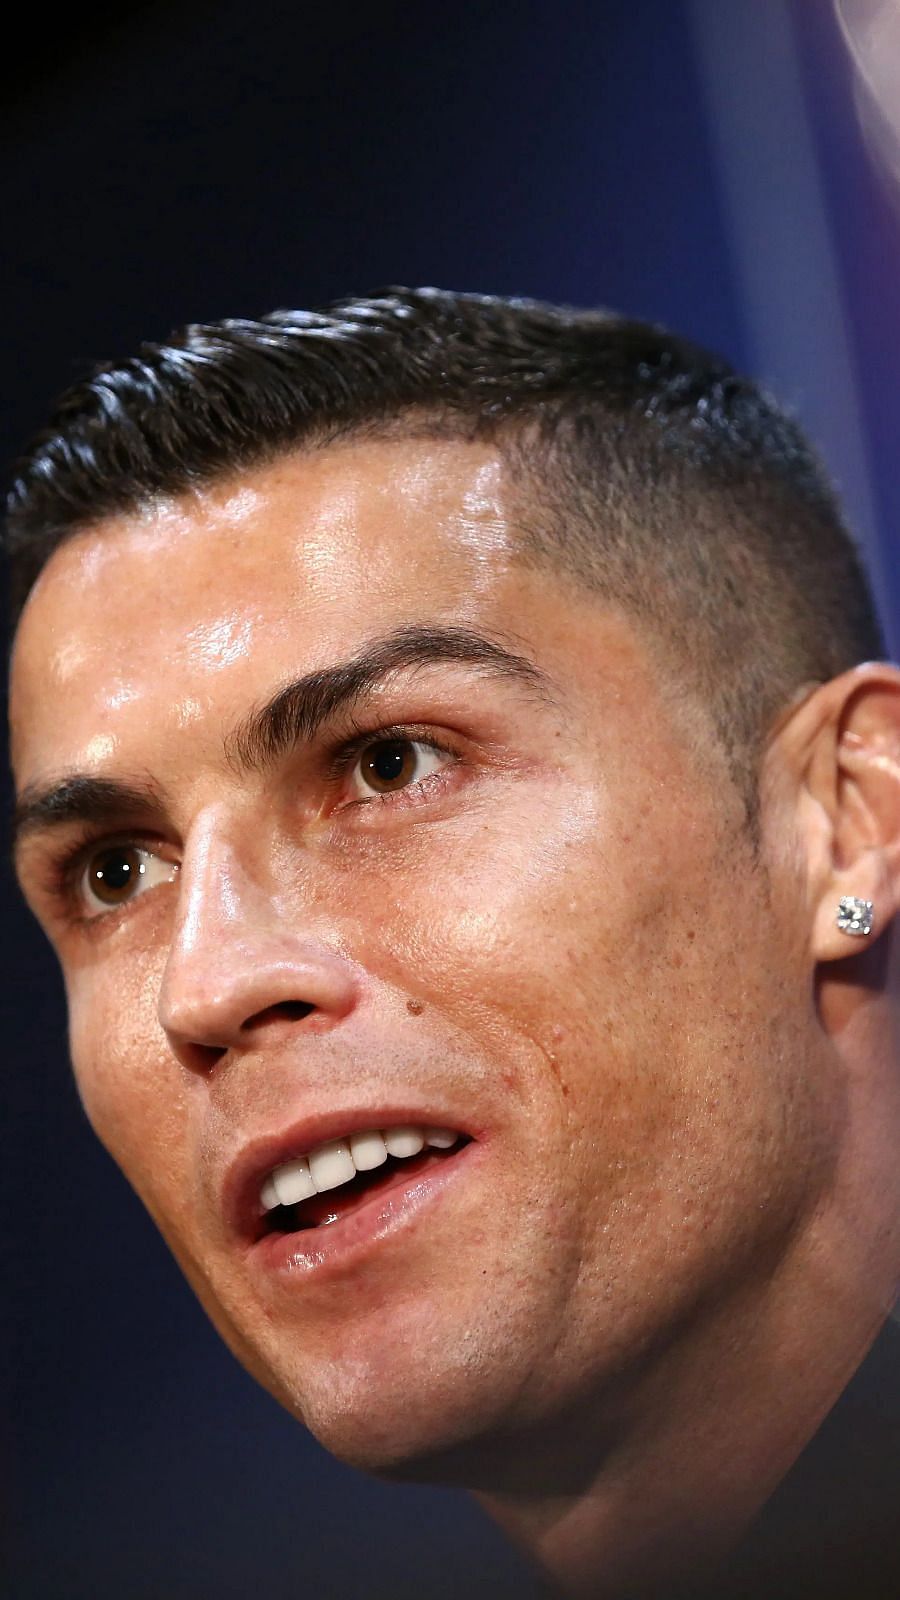 Cristiano Ronaldo speaks about his future and the 2022 FIFA World Cup